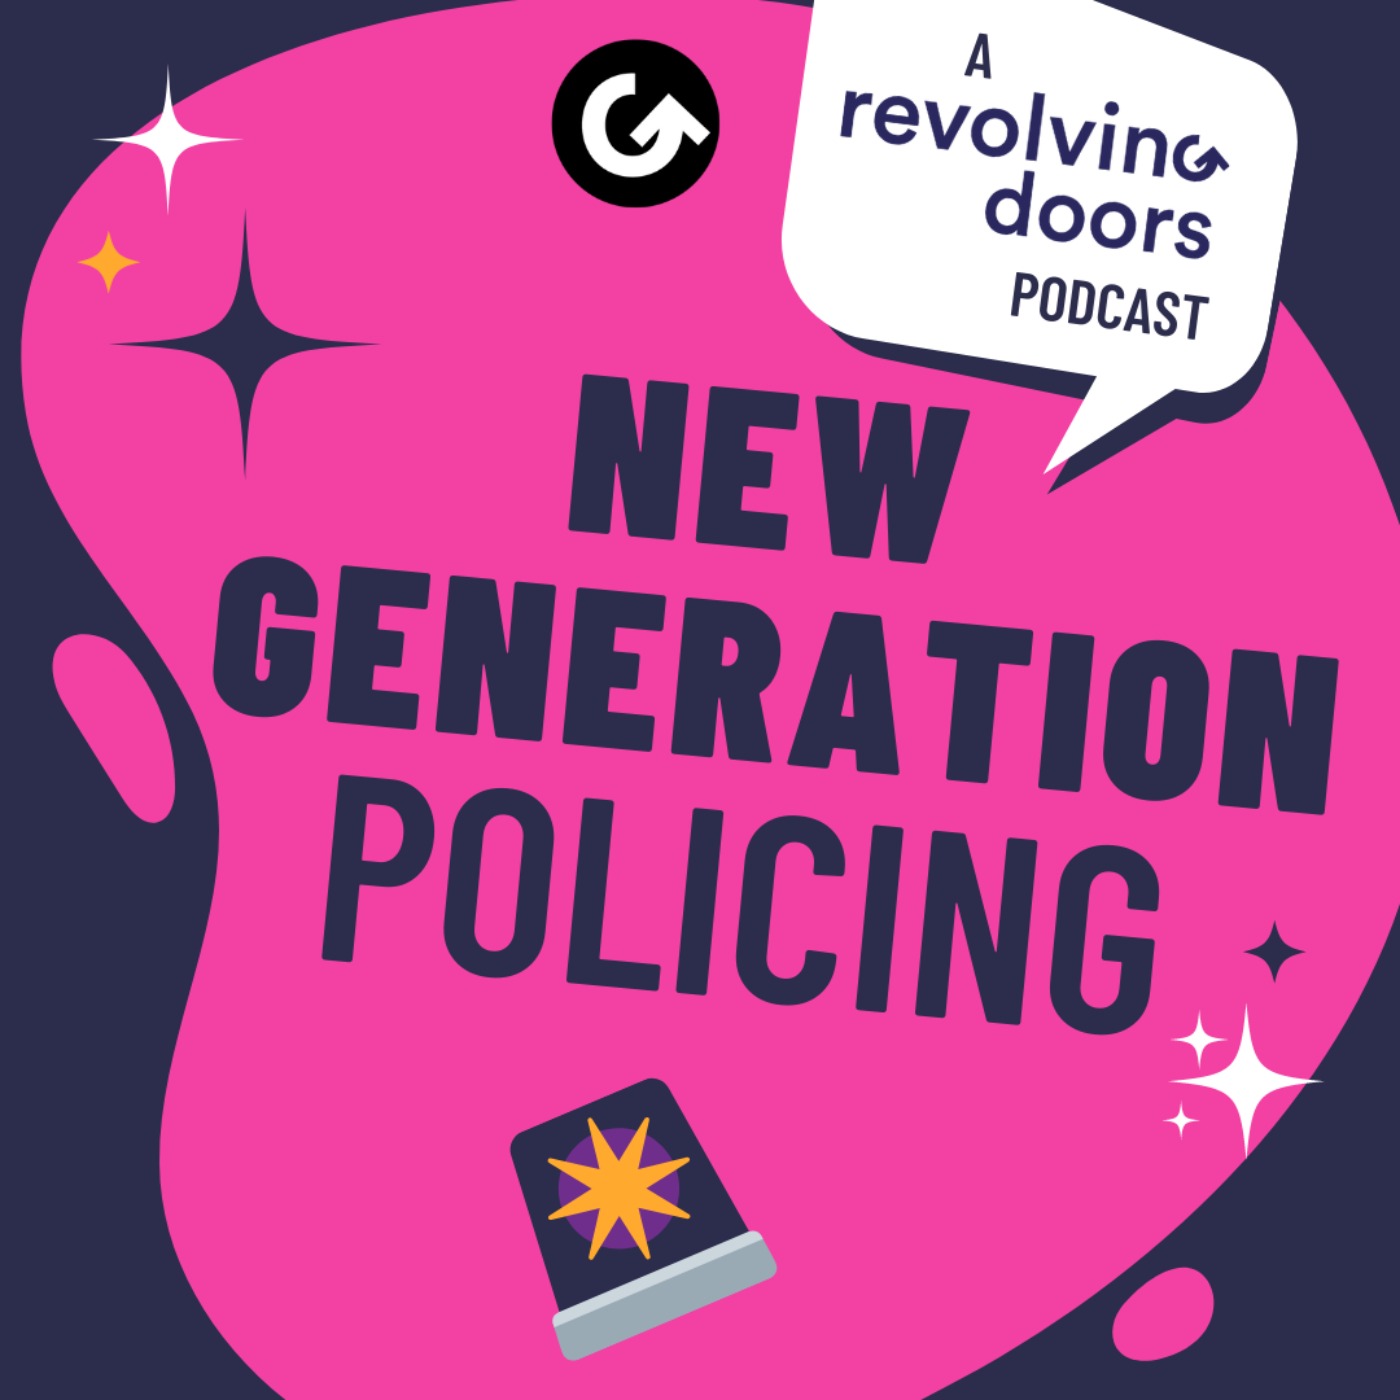 New Generation Policing ep. 3: Going overseas